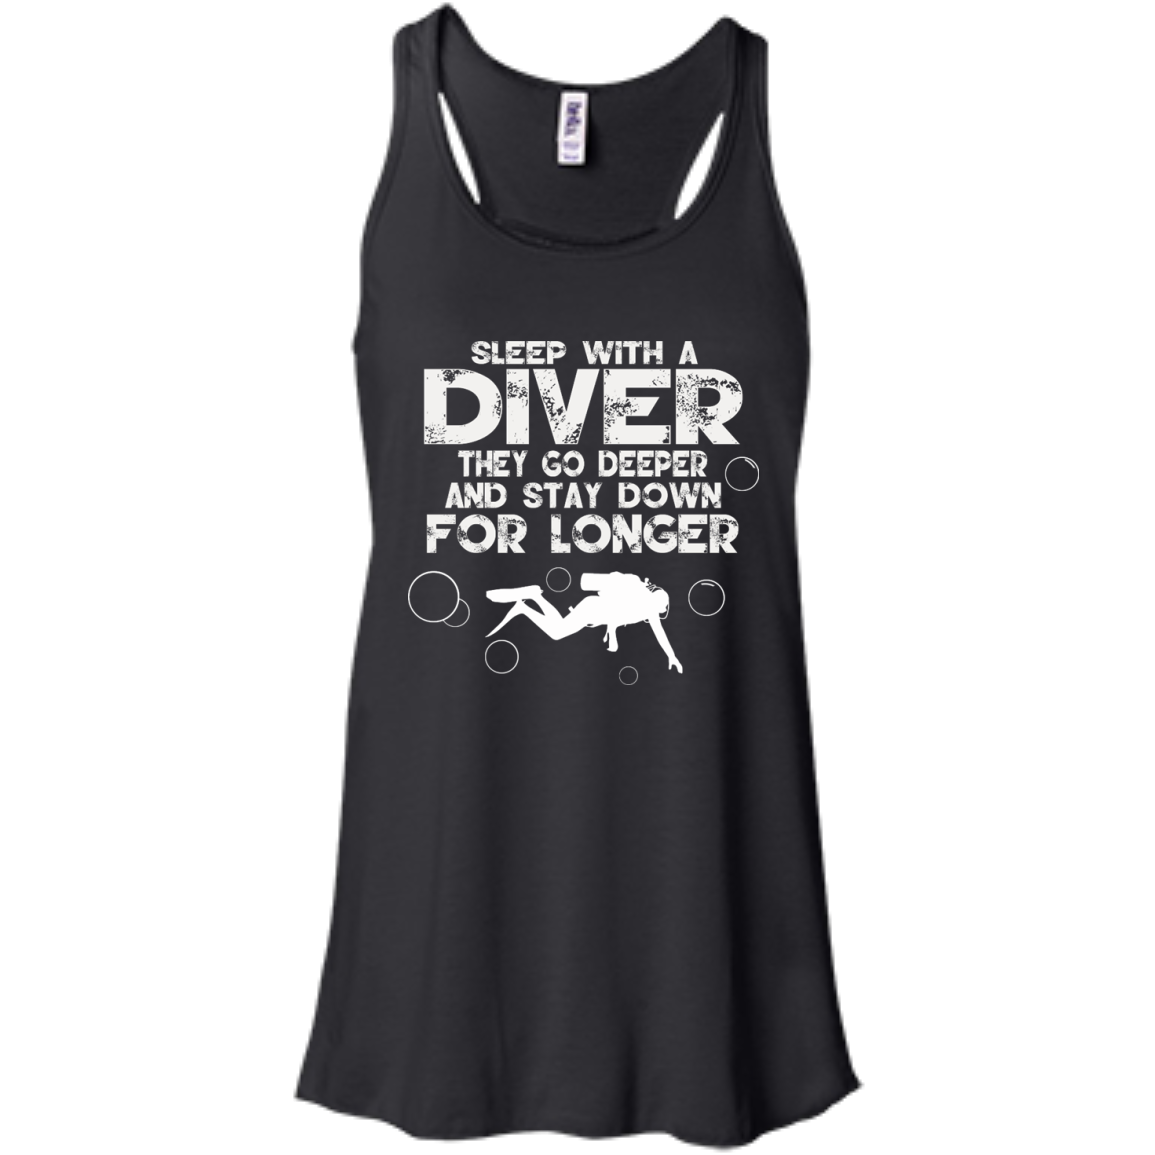 Sleep With A Diver They Go Deeper And Stay Down For Longer Shirt ...